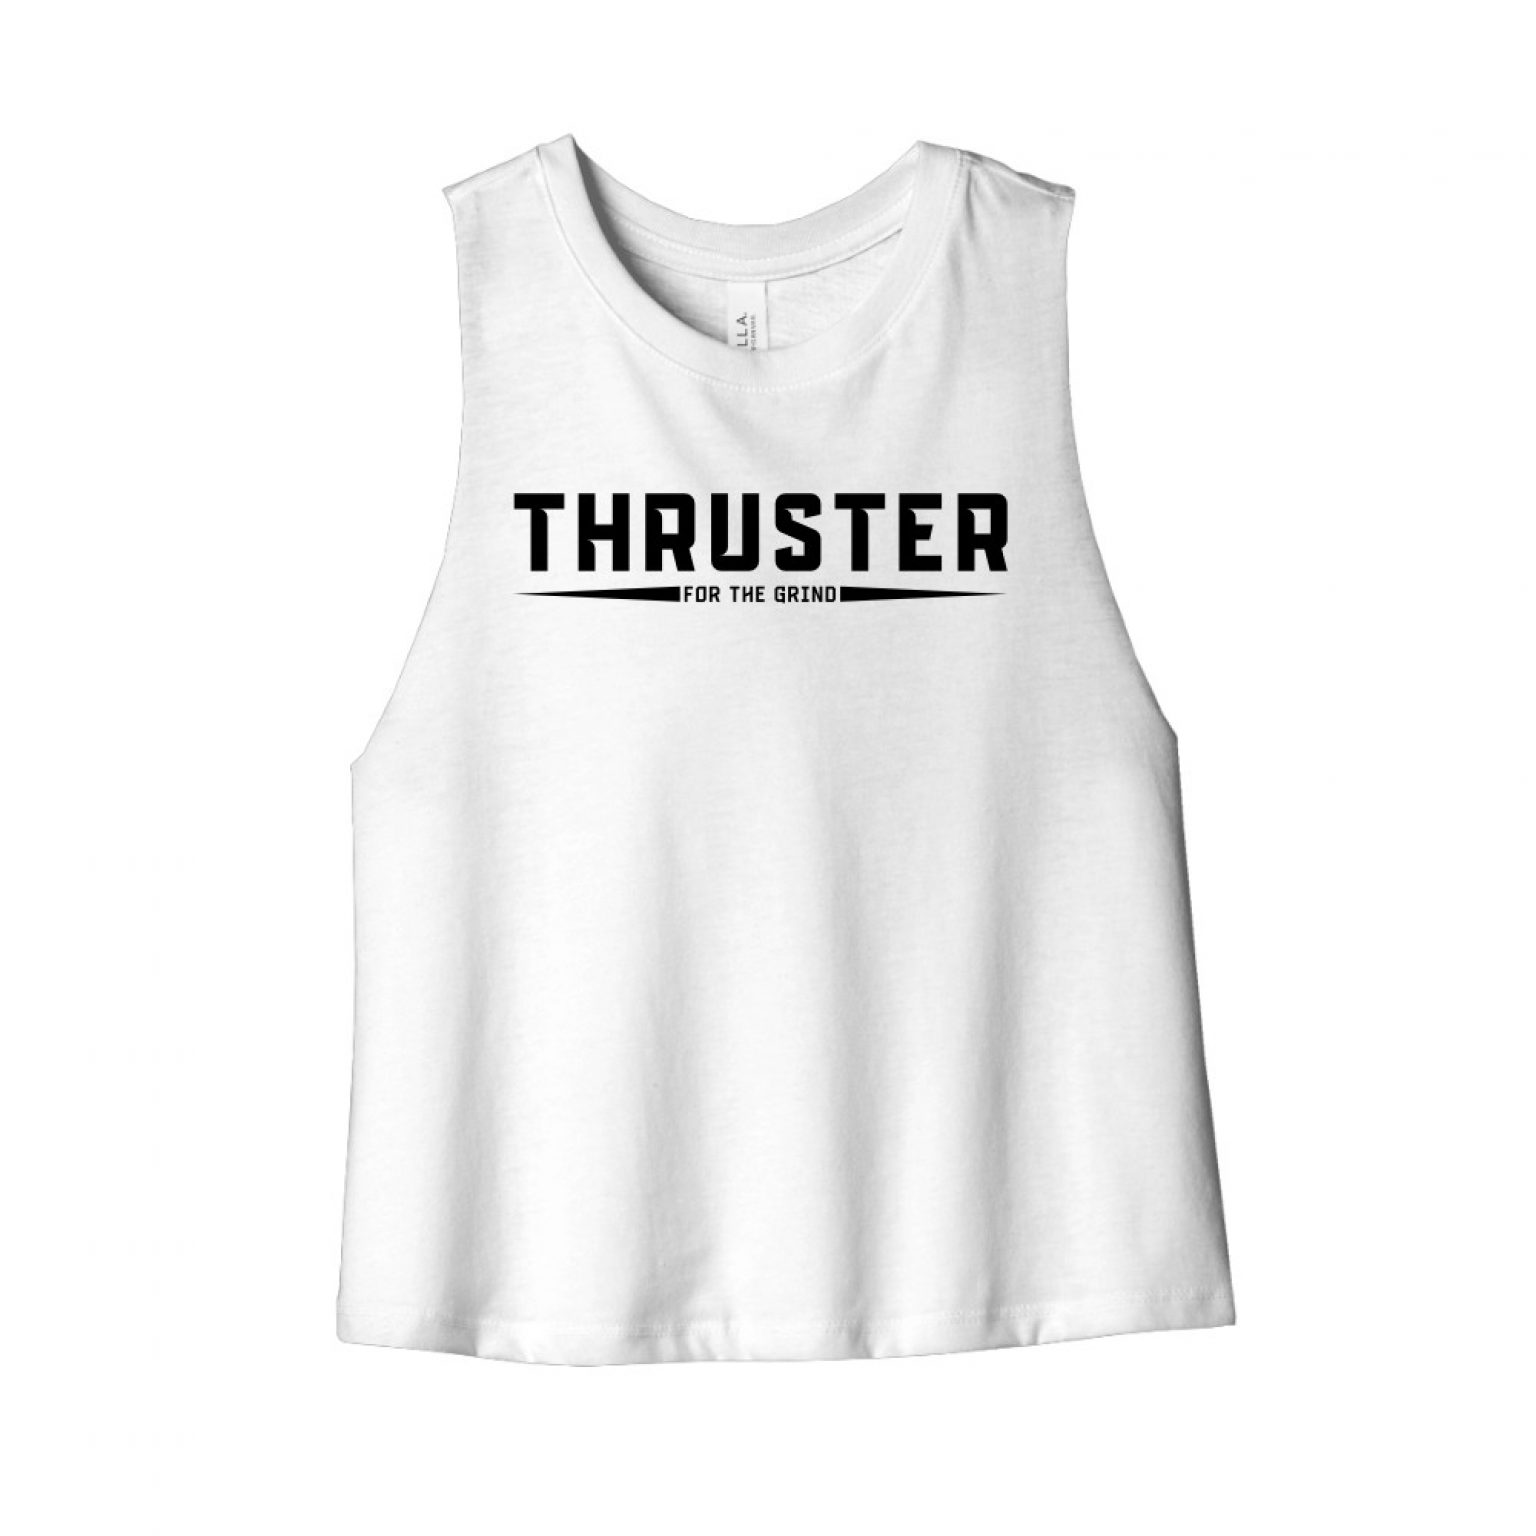 Thruster cropped white